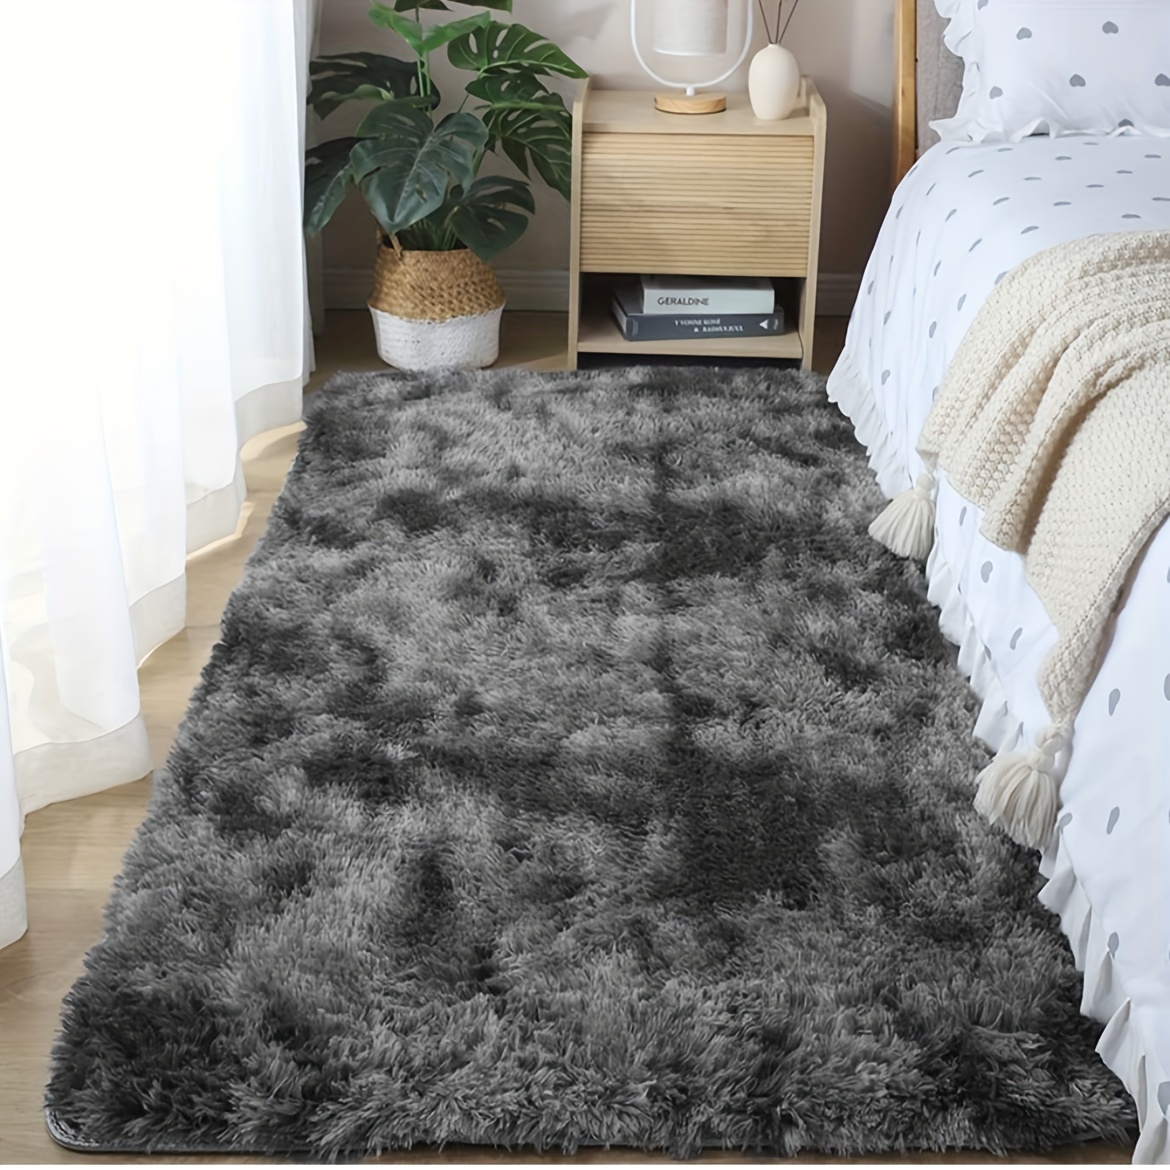 Striped Shaggy Long Rugs for Bathroom Cozy Shag Collection Gray Solid No  Slip Shower Plush Carpet Mat Living & Bedroom Soft Thick Area Rug Large  Bath